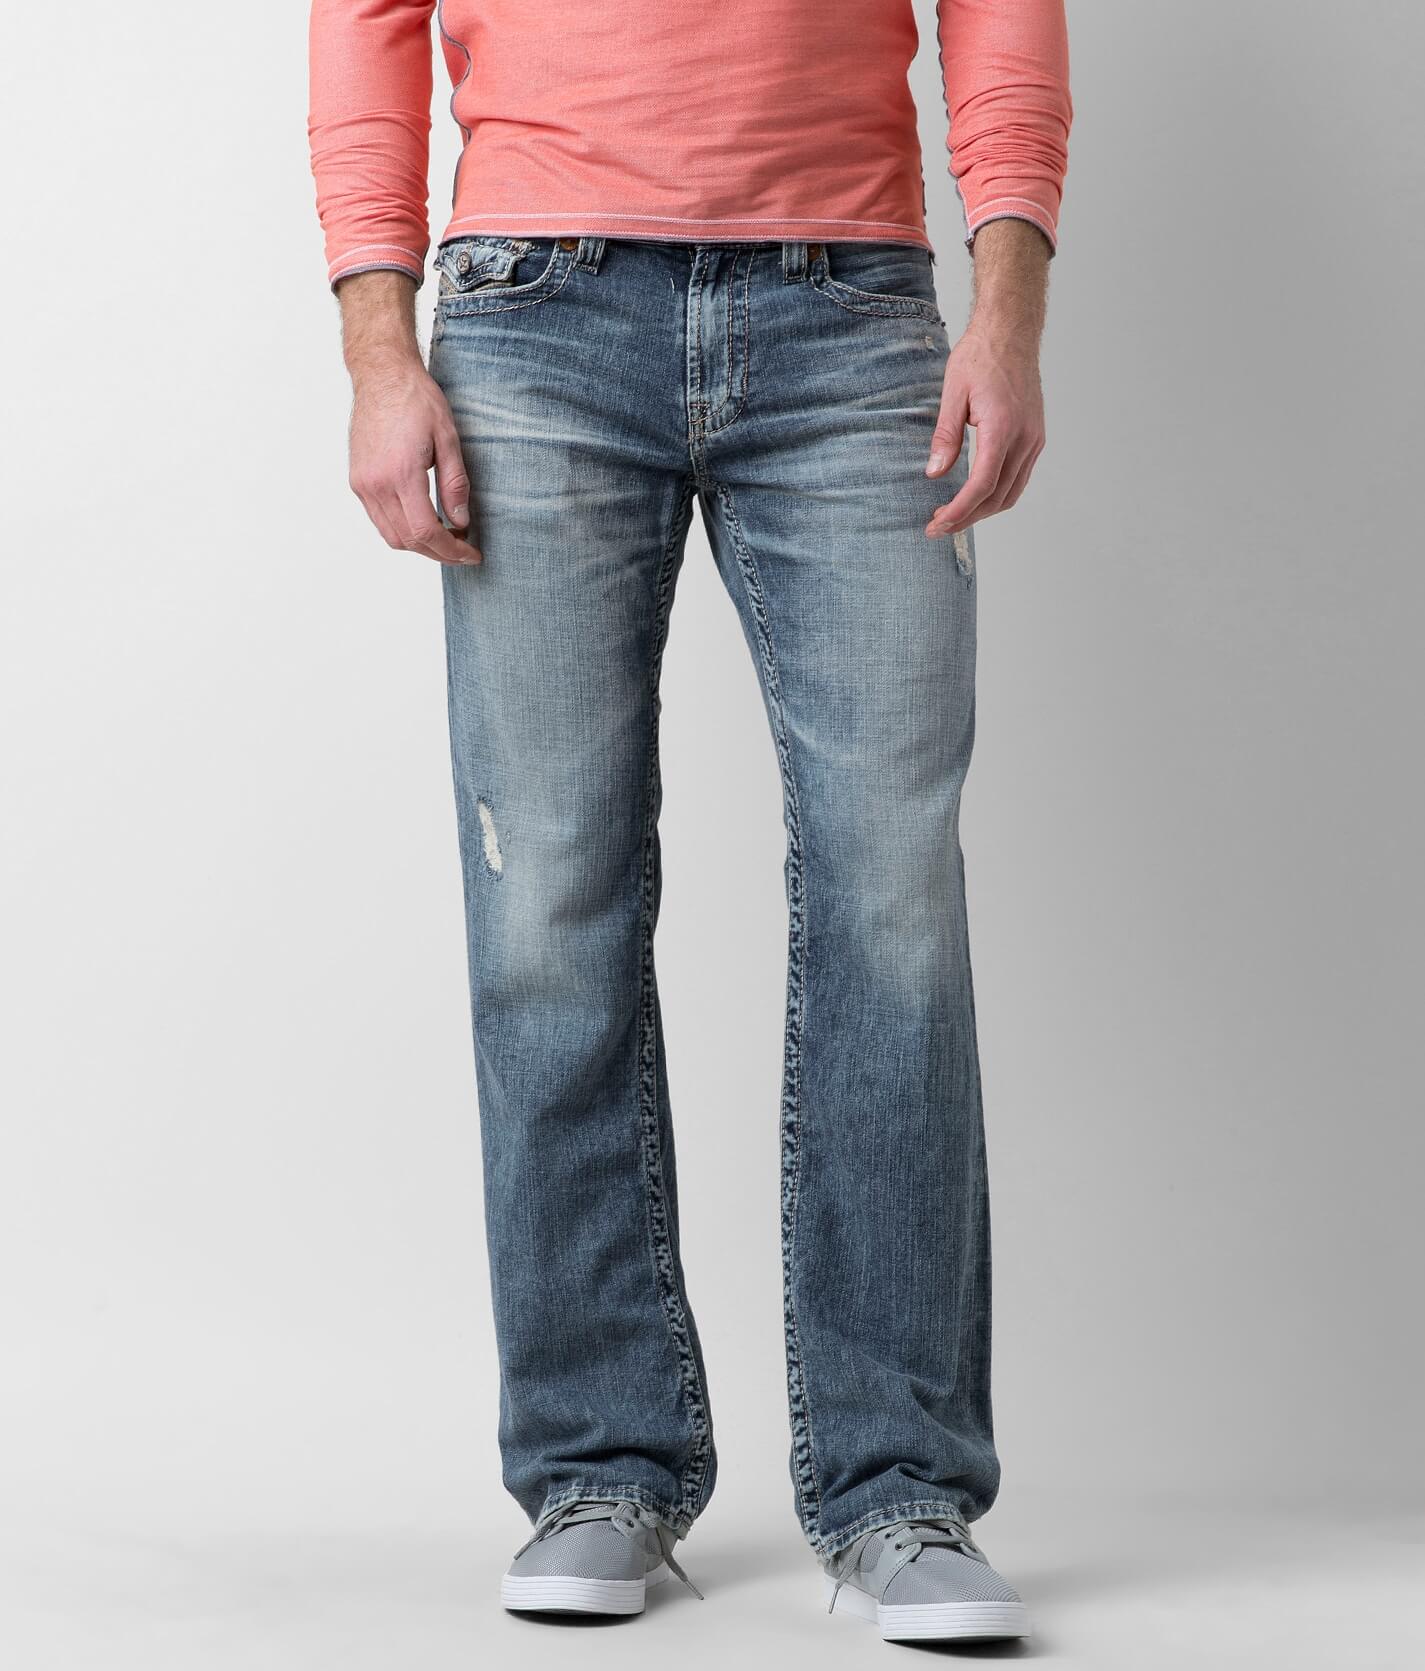 mens big star jeans clearance